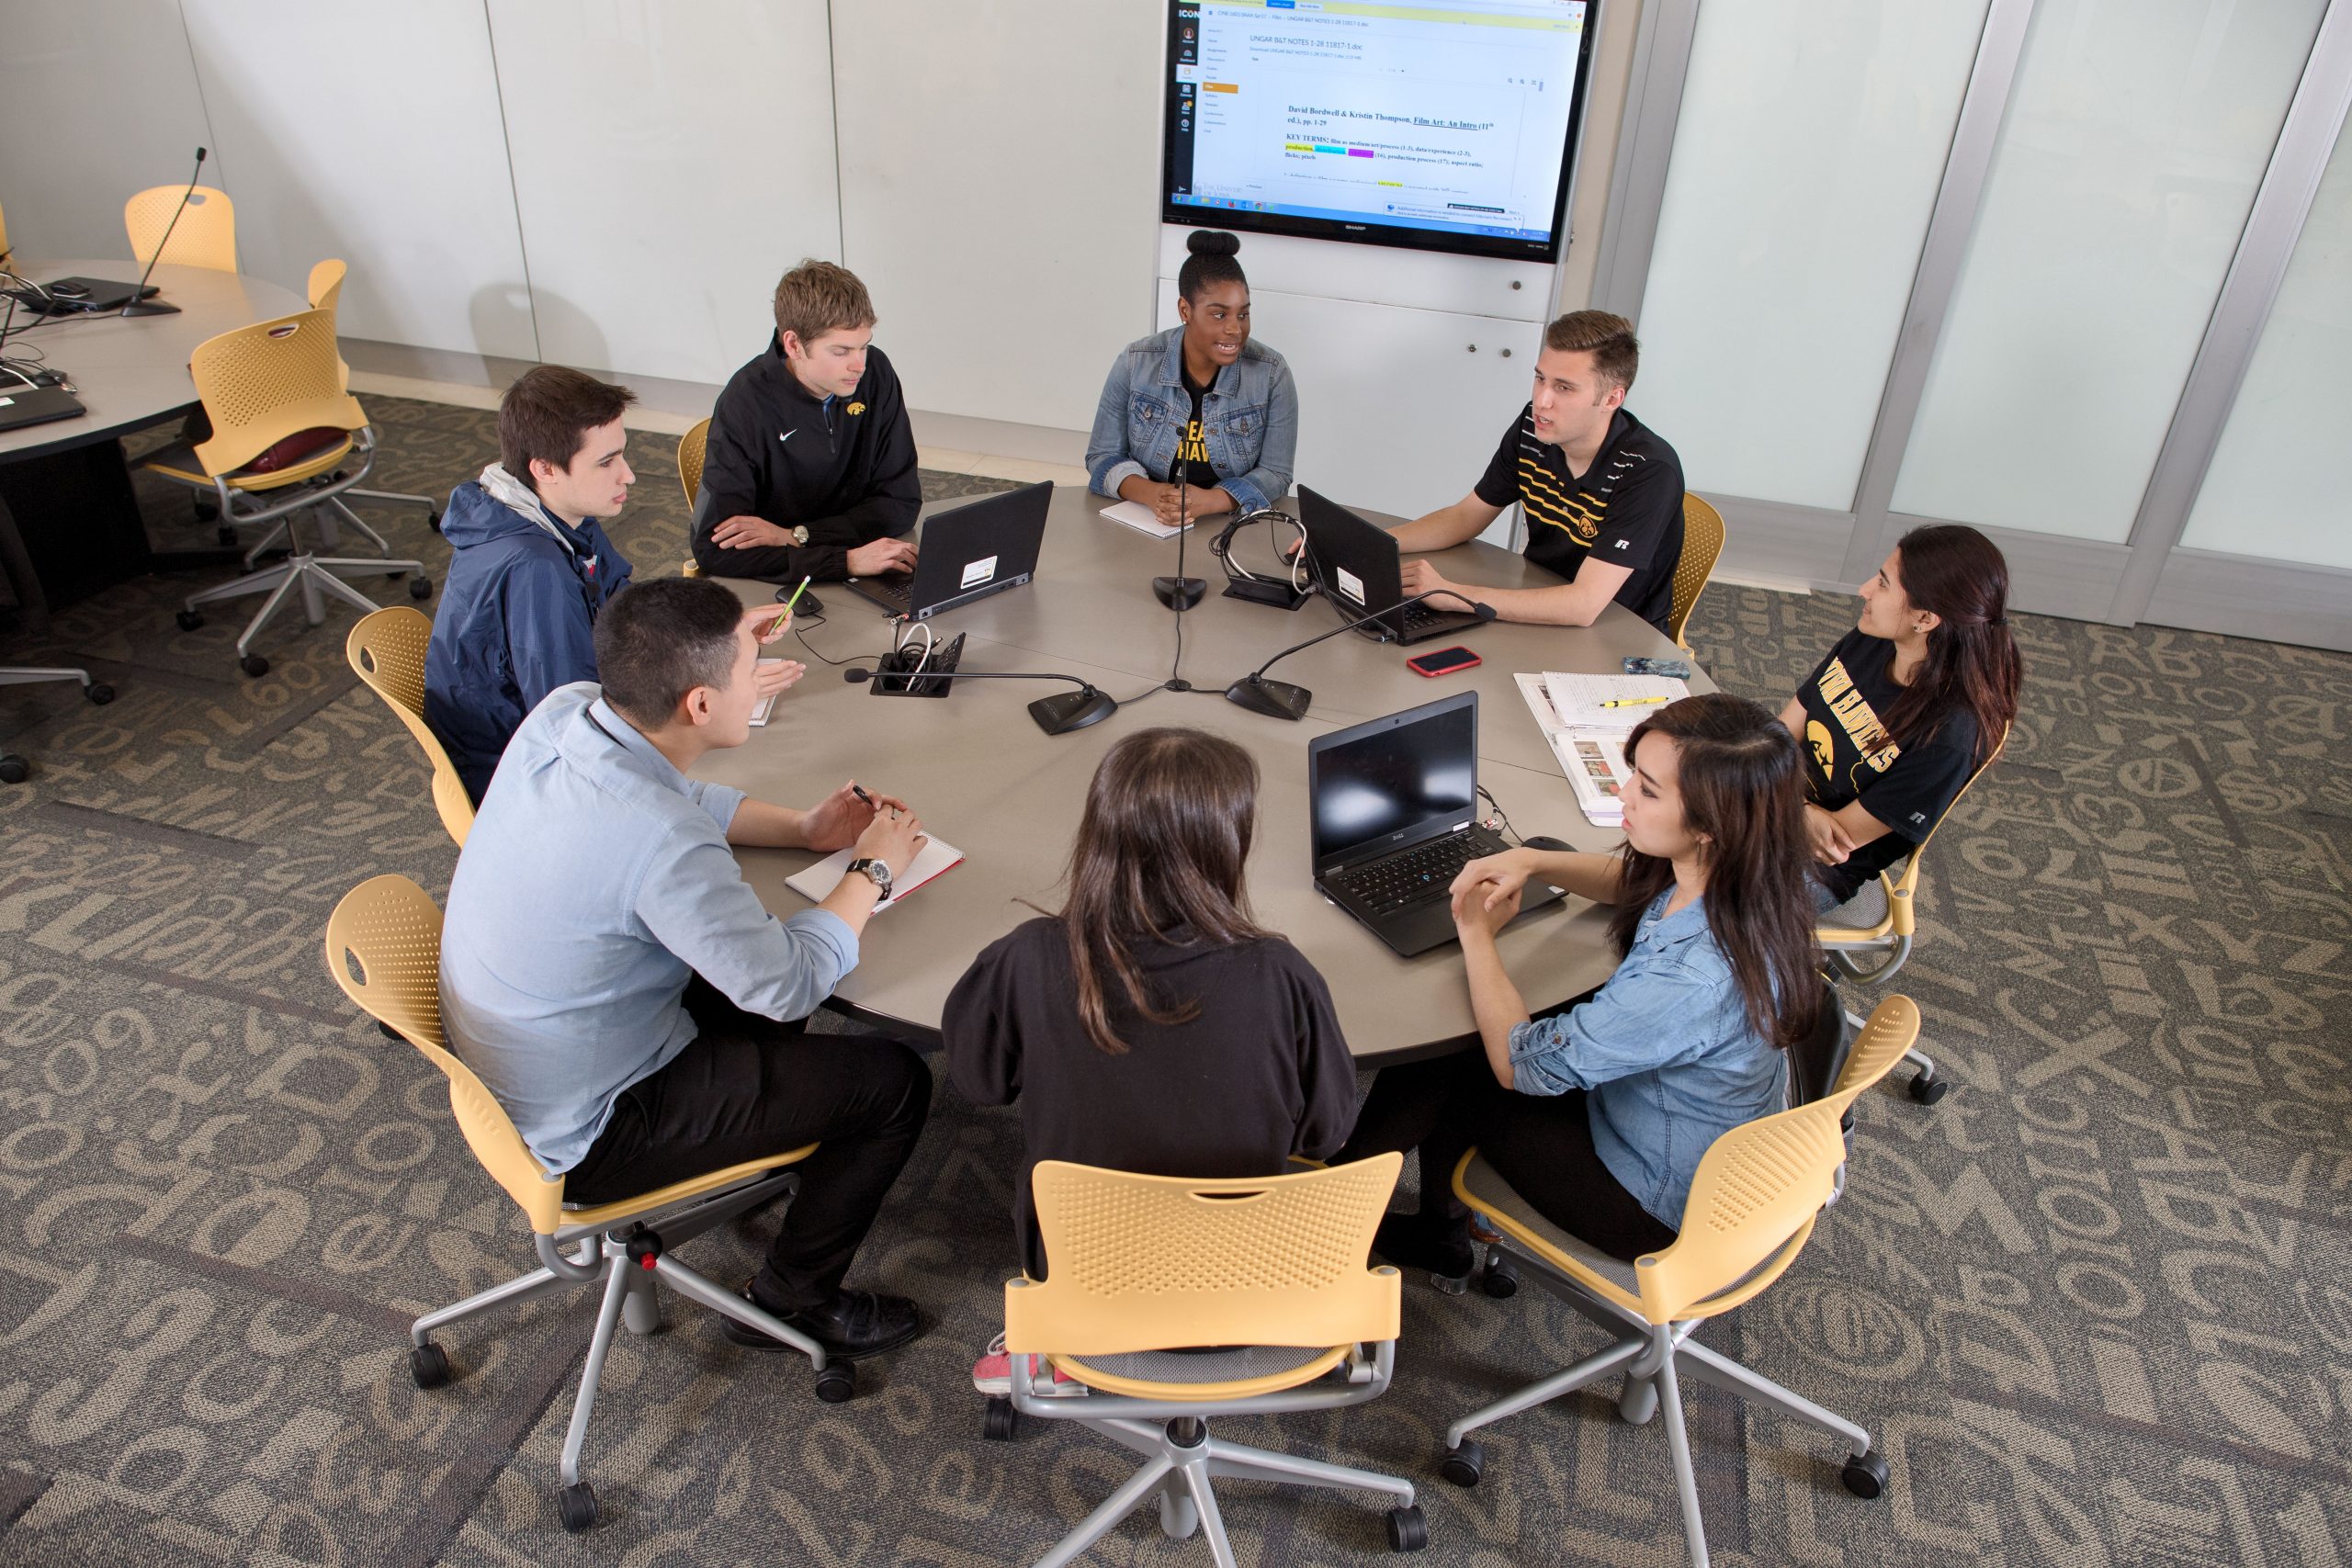 A group of eight students working together at a round table in an active learning classroom.